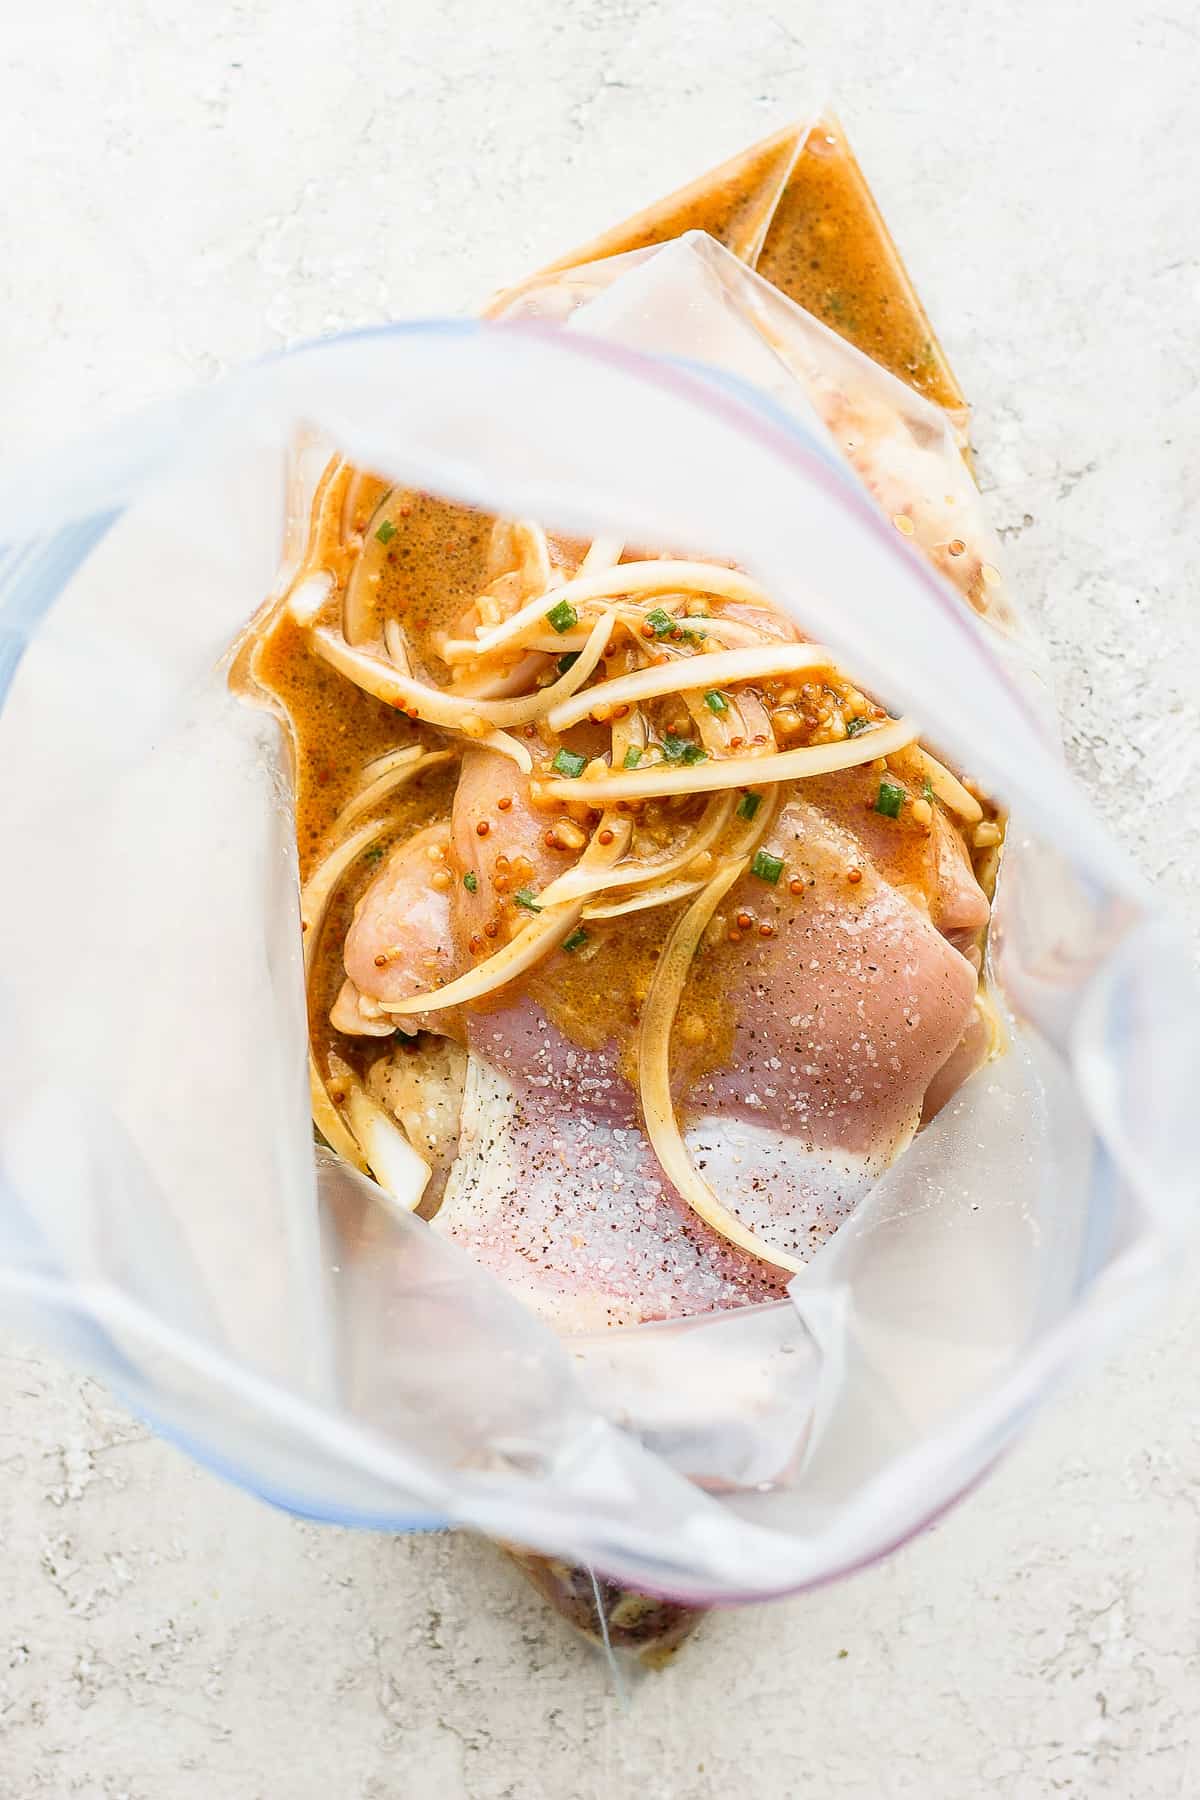 Chicken thighs and marinade in a gallon size bag.